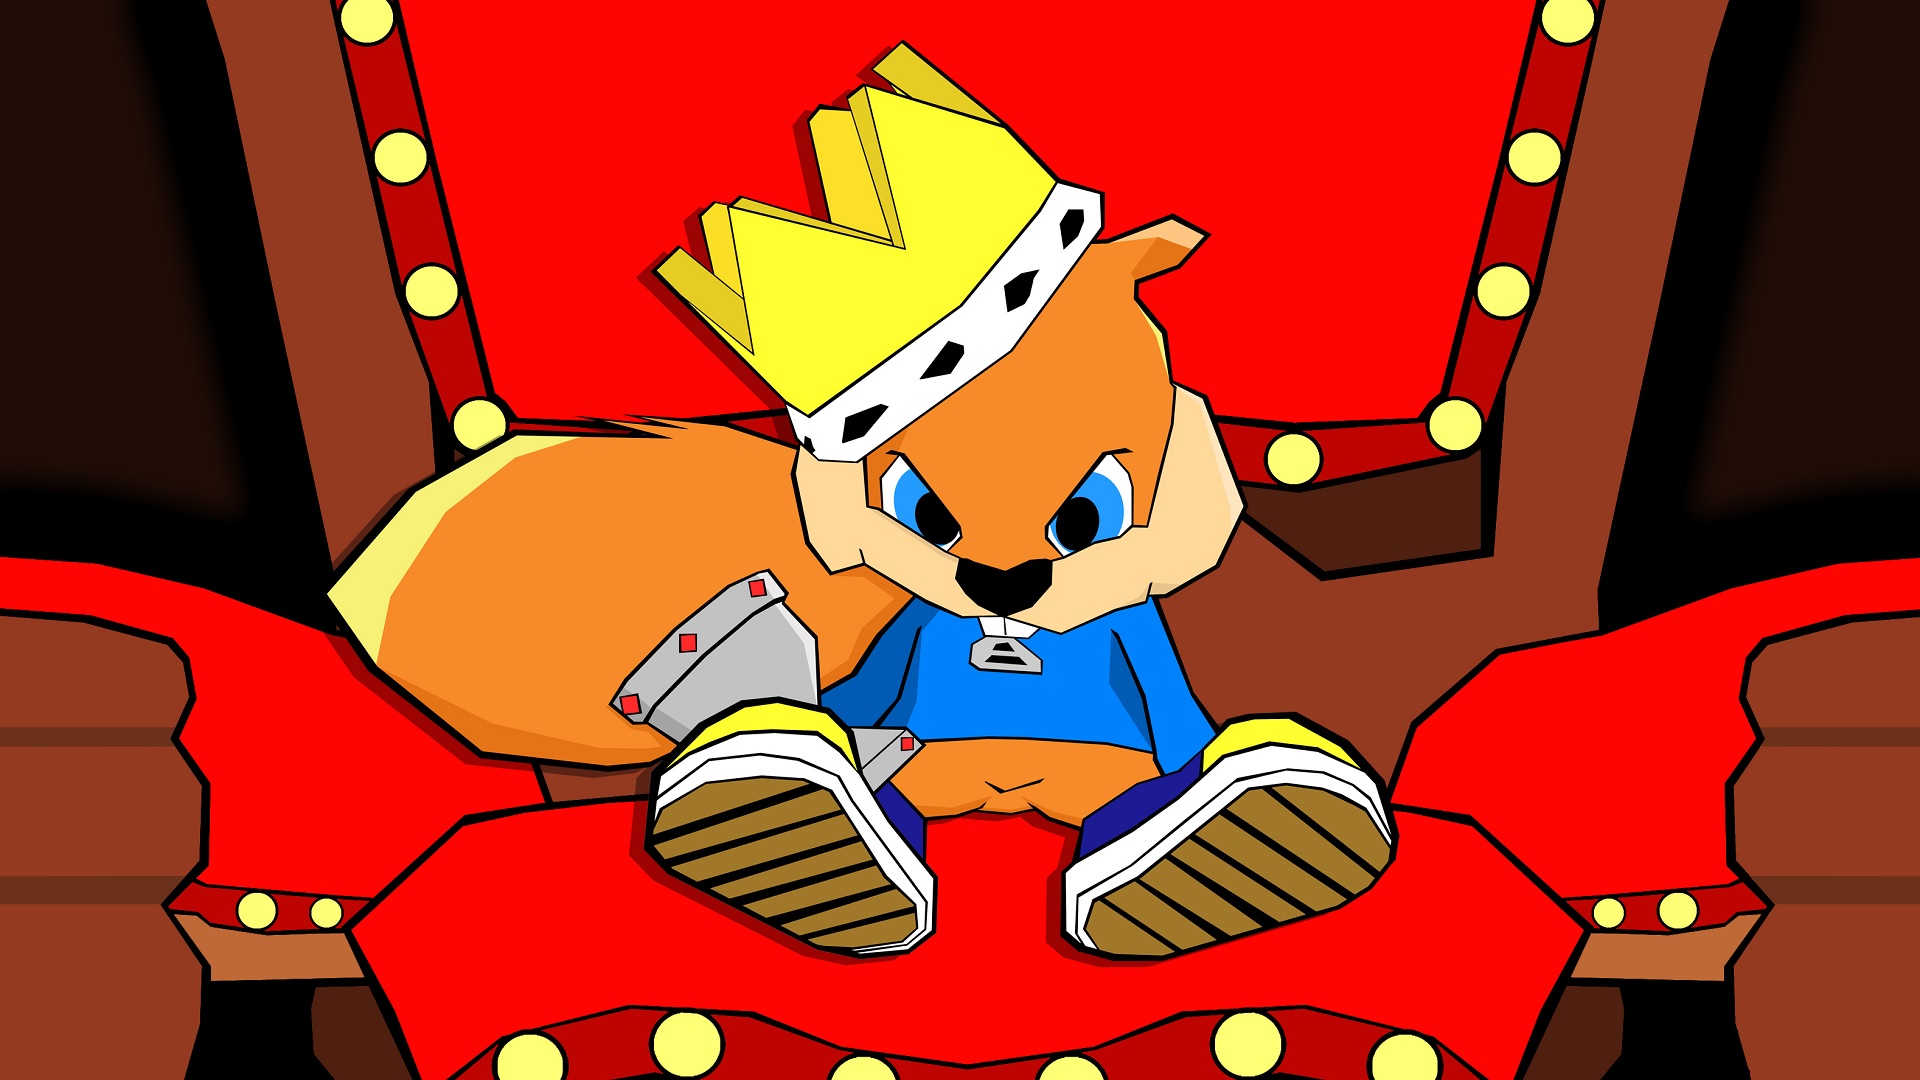 Video Game Conker's Bad Fur Day HD Wallpaper Background Image.